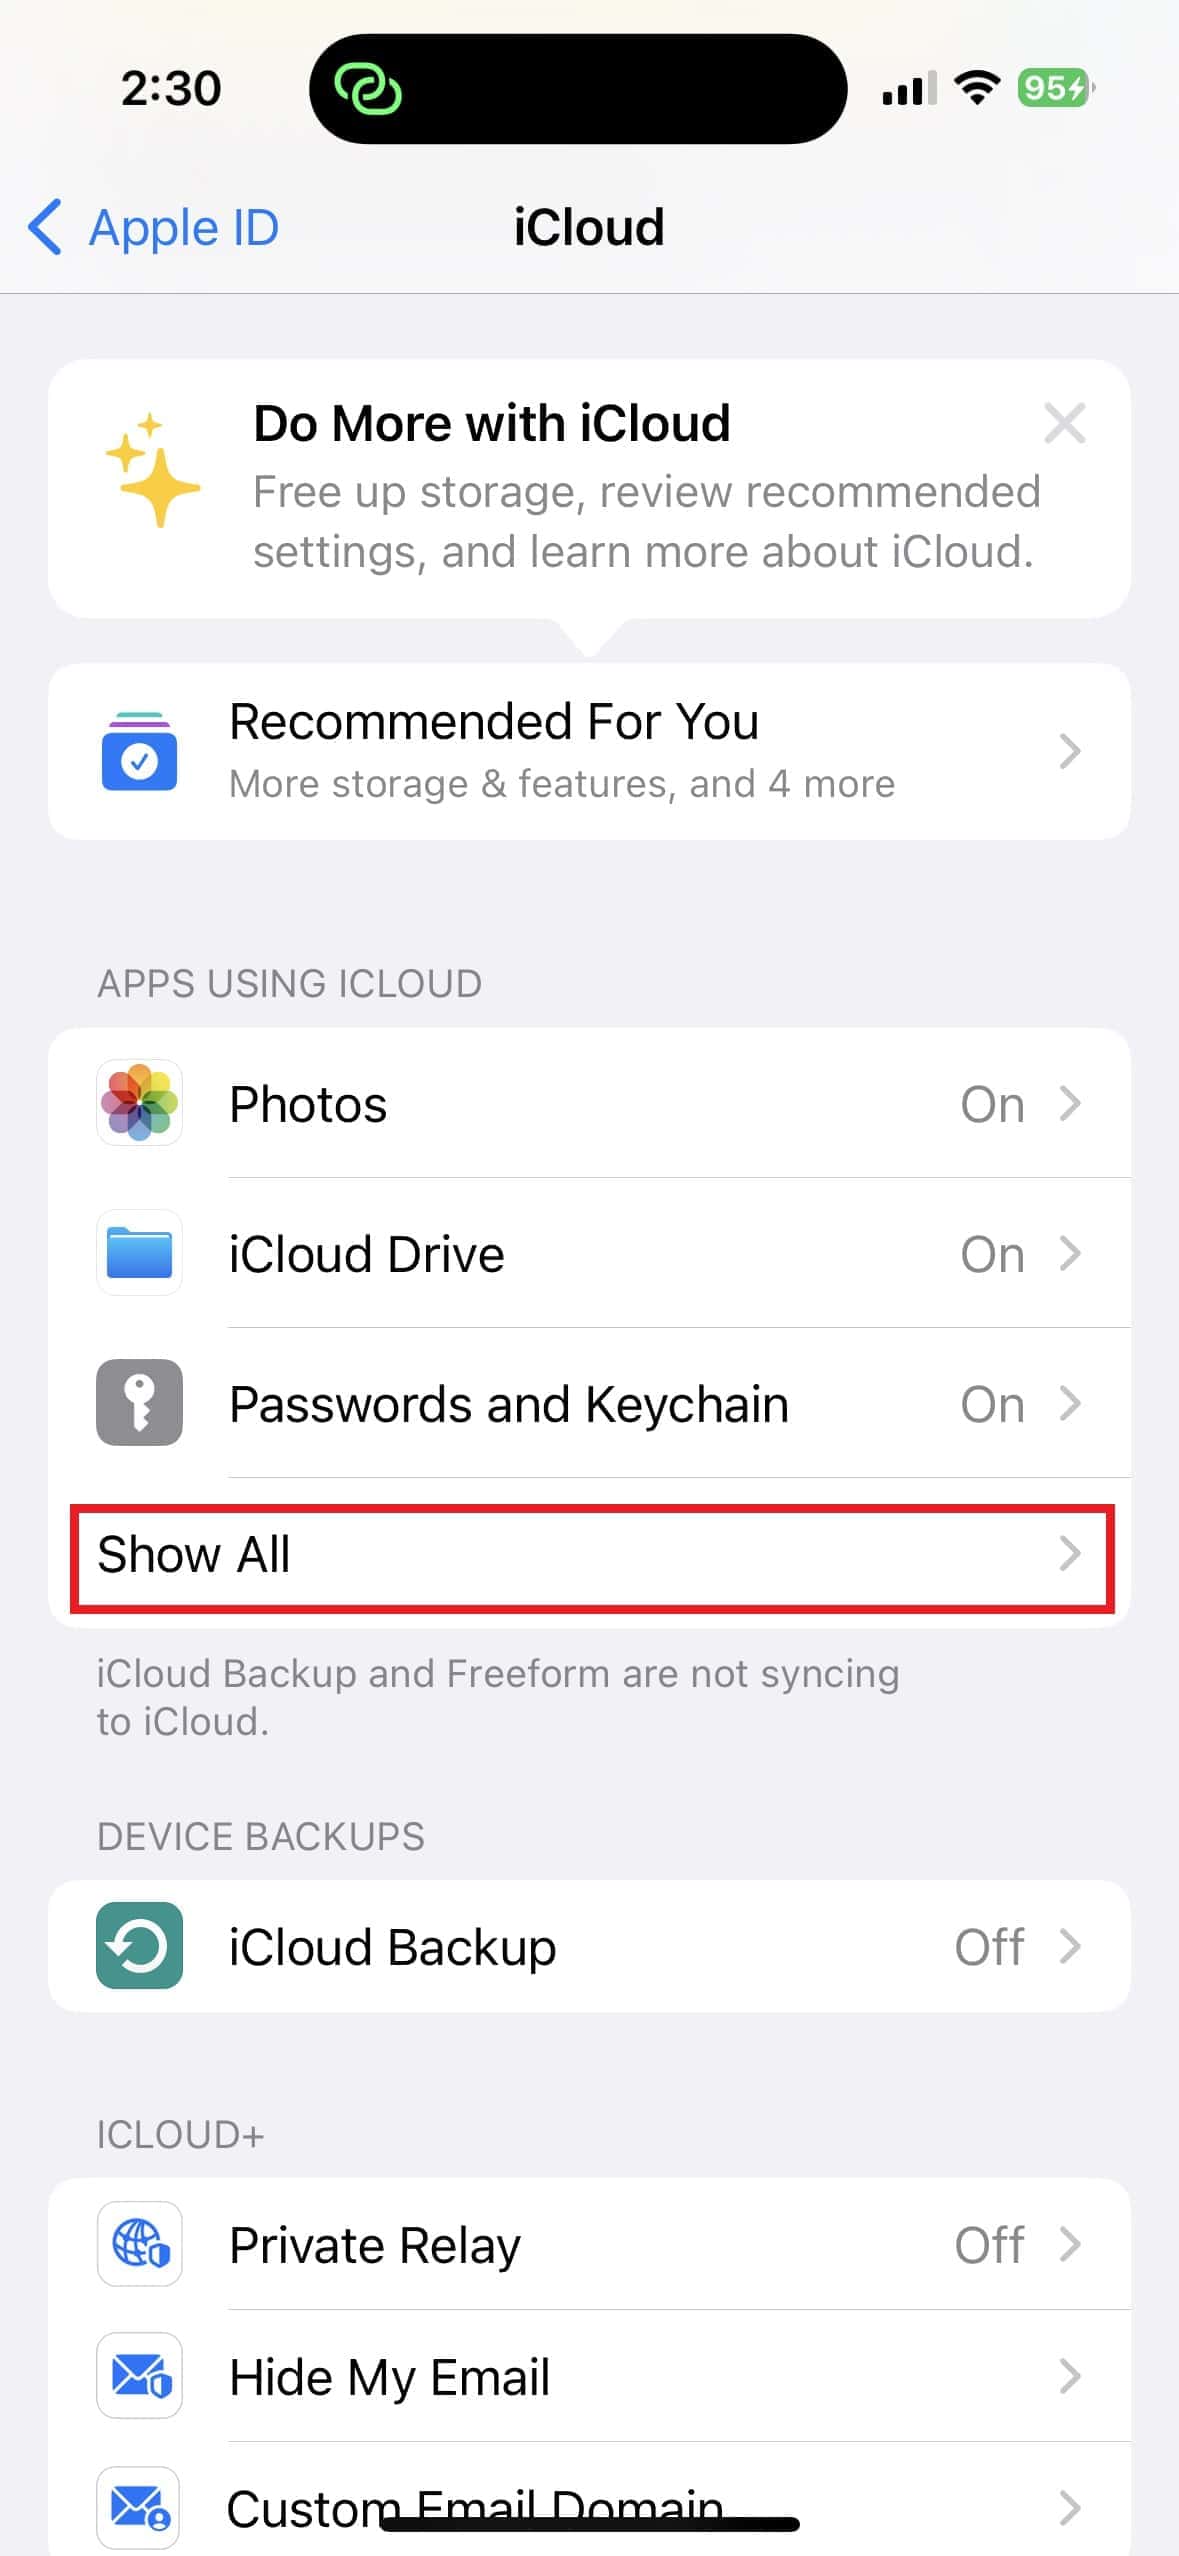 Access all iCloud options in Settings menu on iPhone